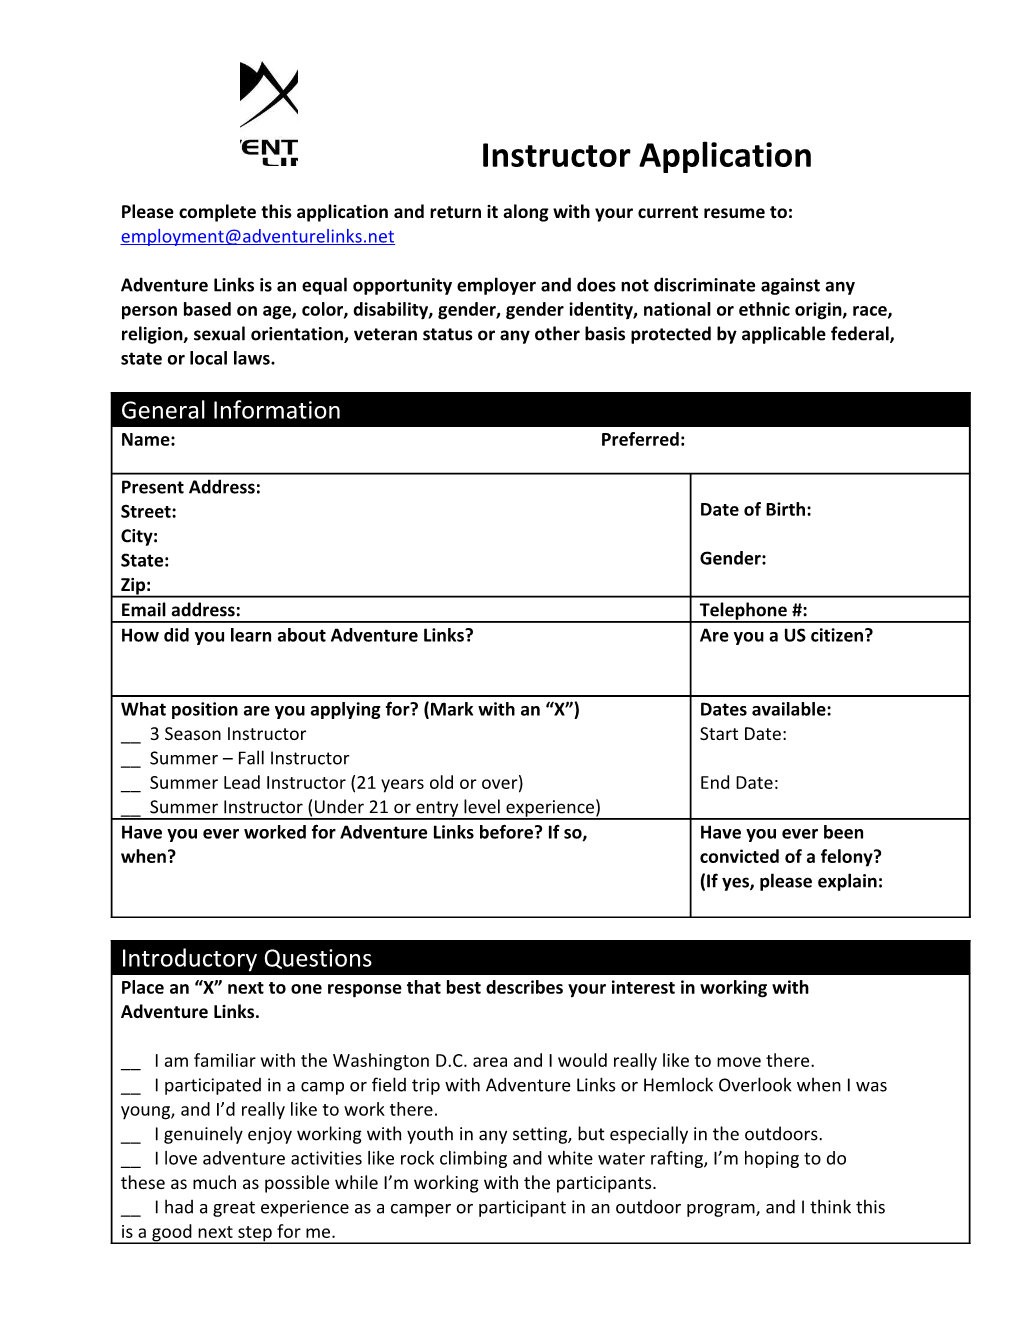 Please Complete This Application and Return It Along with Your Current Resume To